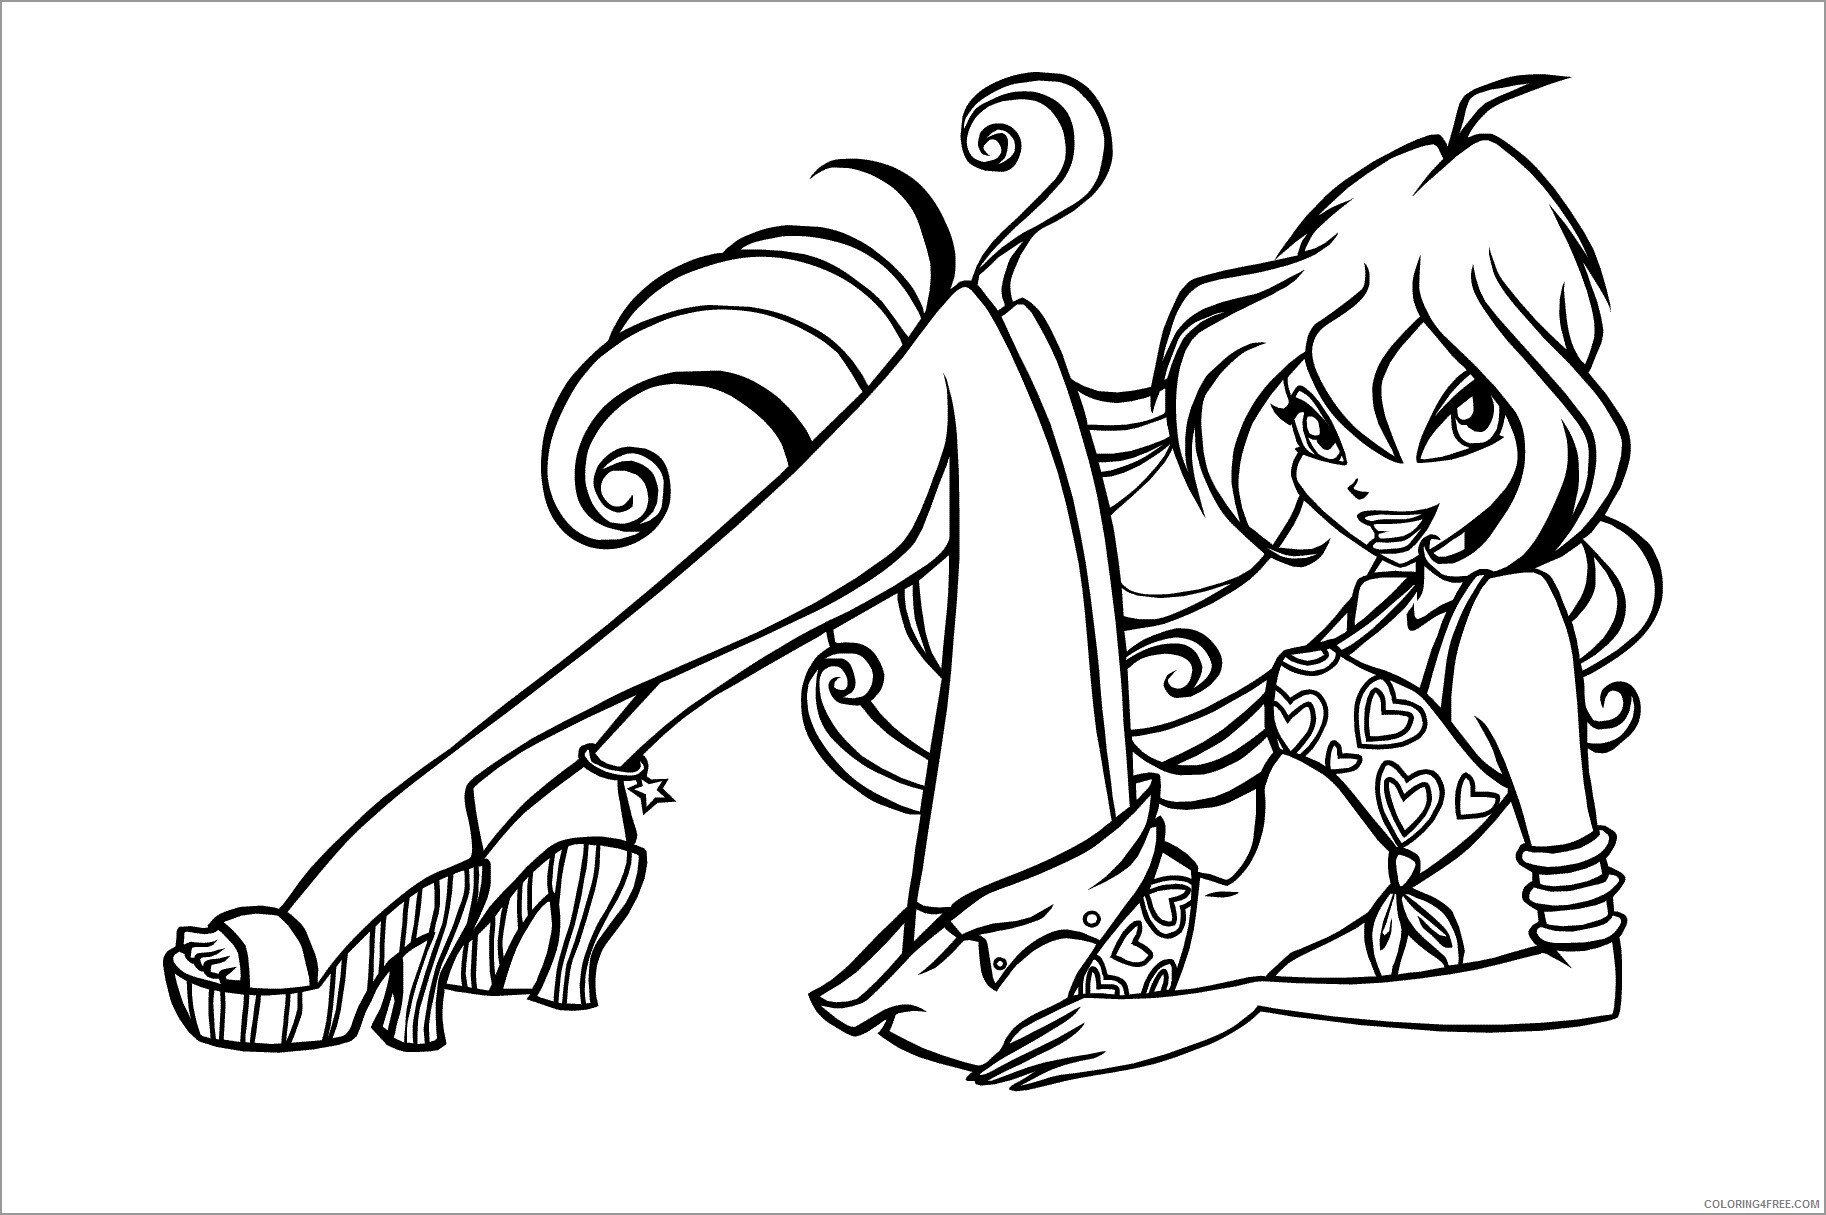 Winx Club Coloring Pages TV Film free winx club for kids Printable 2020 11463 Coloring4free